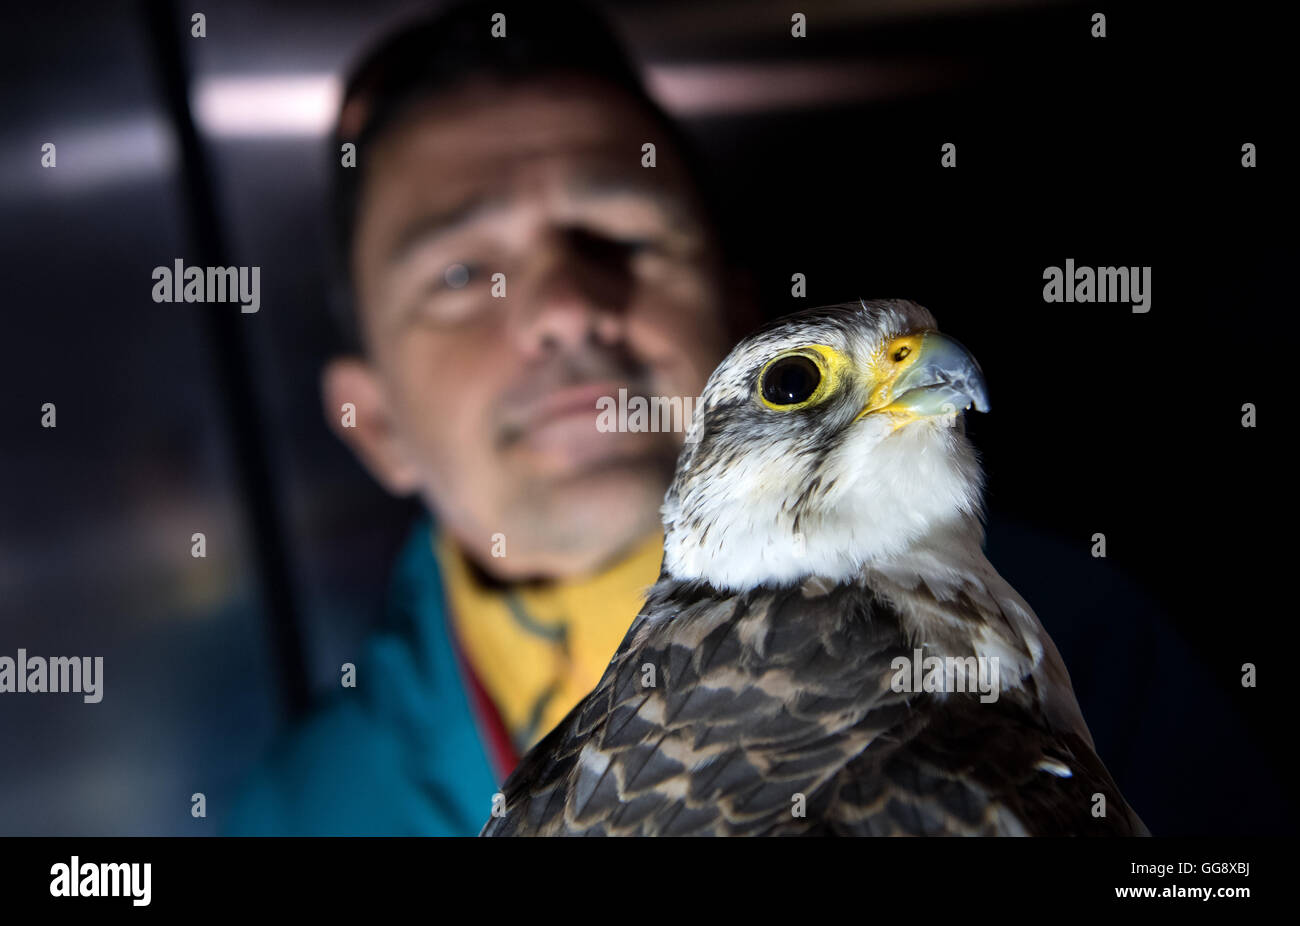 Munich, Germany. 10th Aug, 2016. Falcon keeper Helmut Achatz and his falcon in a wind tunnel at the Institute of Fluid Mechanics and Aerodynamics at the at the Bundeswehr University in Munich, Germany, 10 August 2016. The staff at the Institute hope to catch the flight to with high-speed cameras for the analysis of flight movements foundations for future aircraft. Photo: SVEN HOPPE/dpa/Alamy Live News Stock Photo